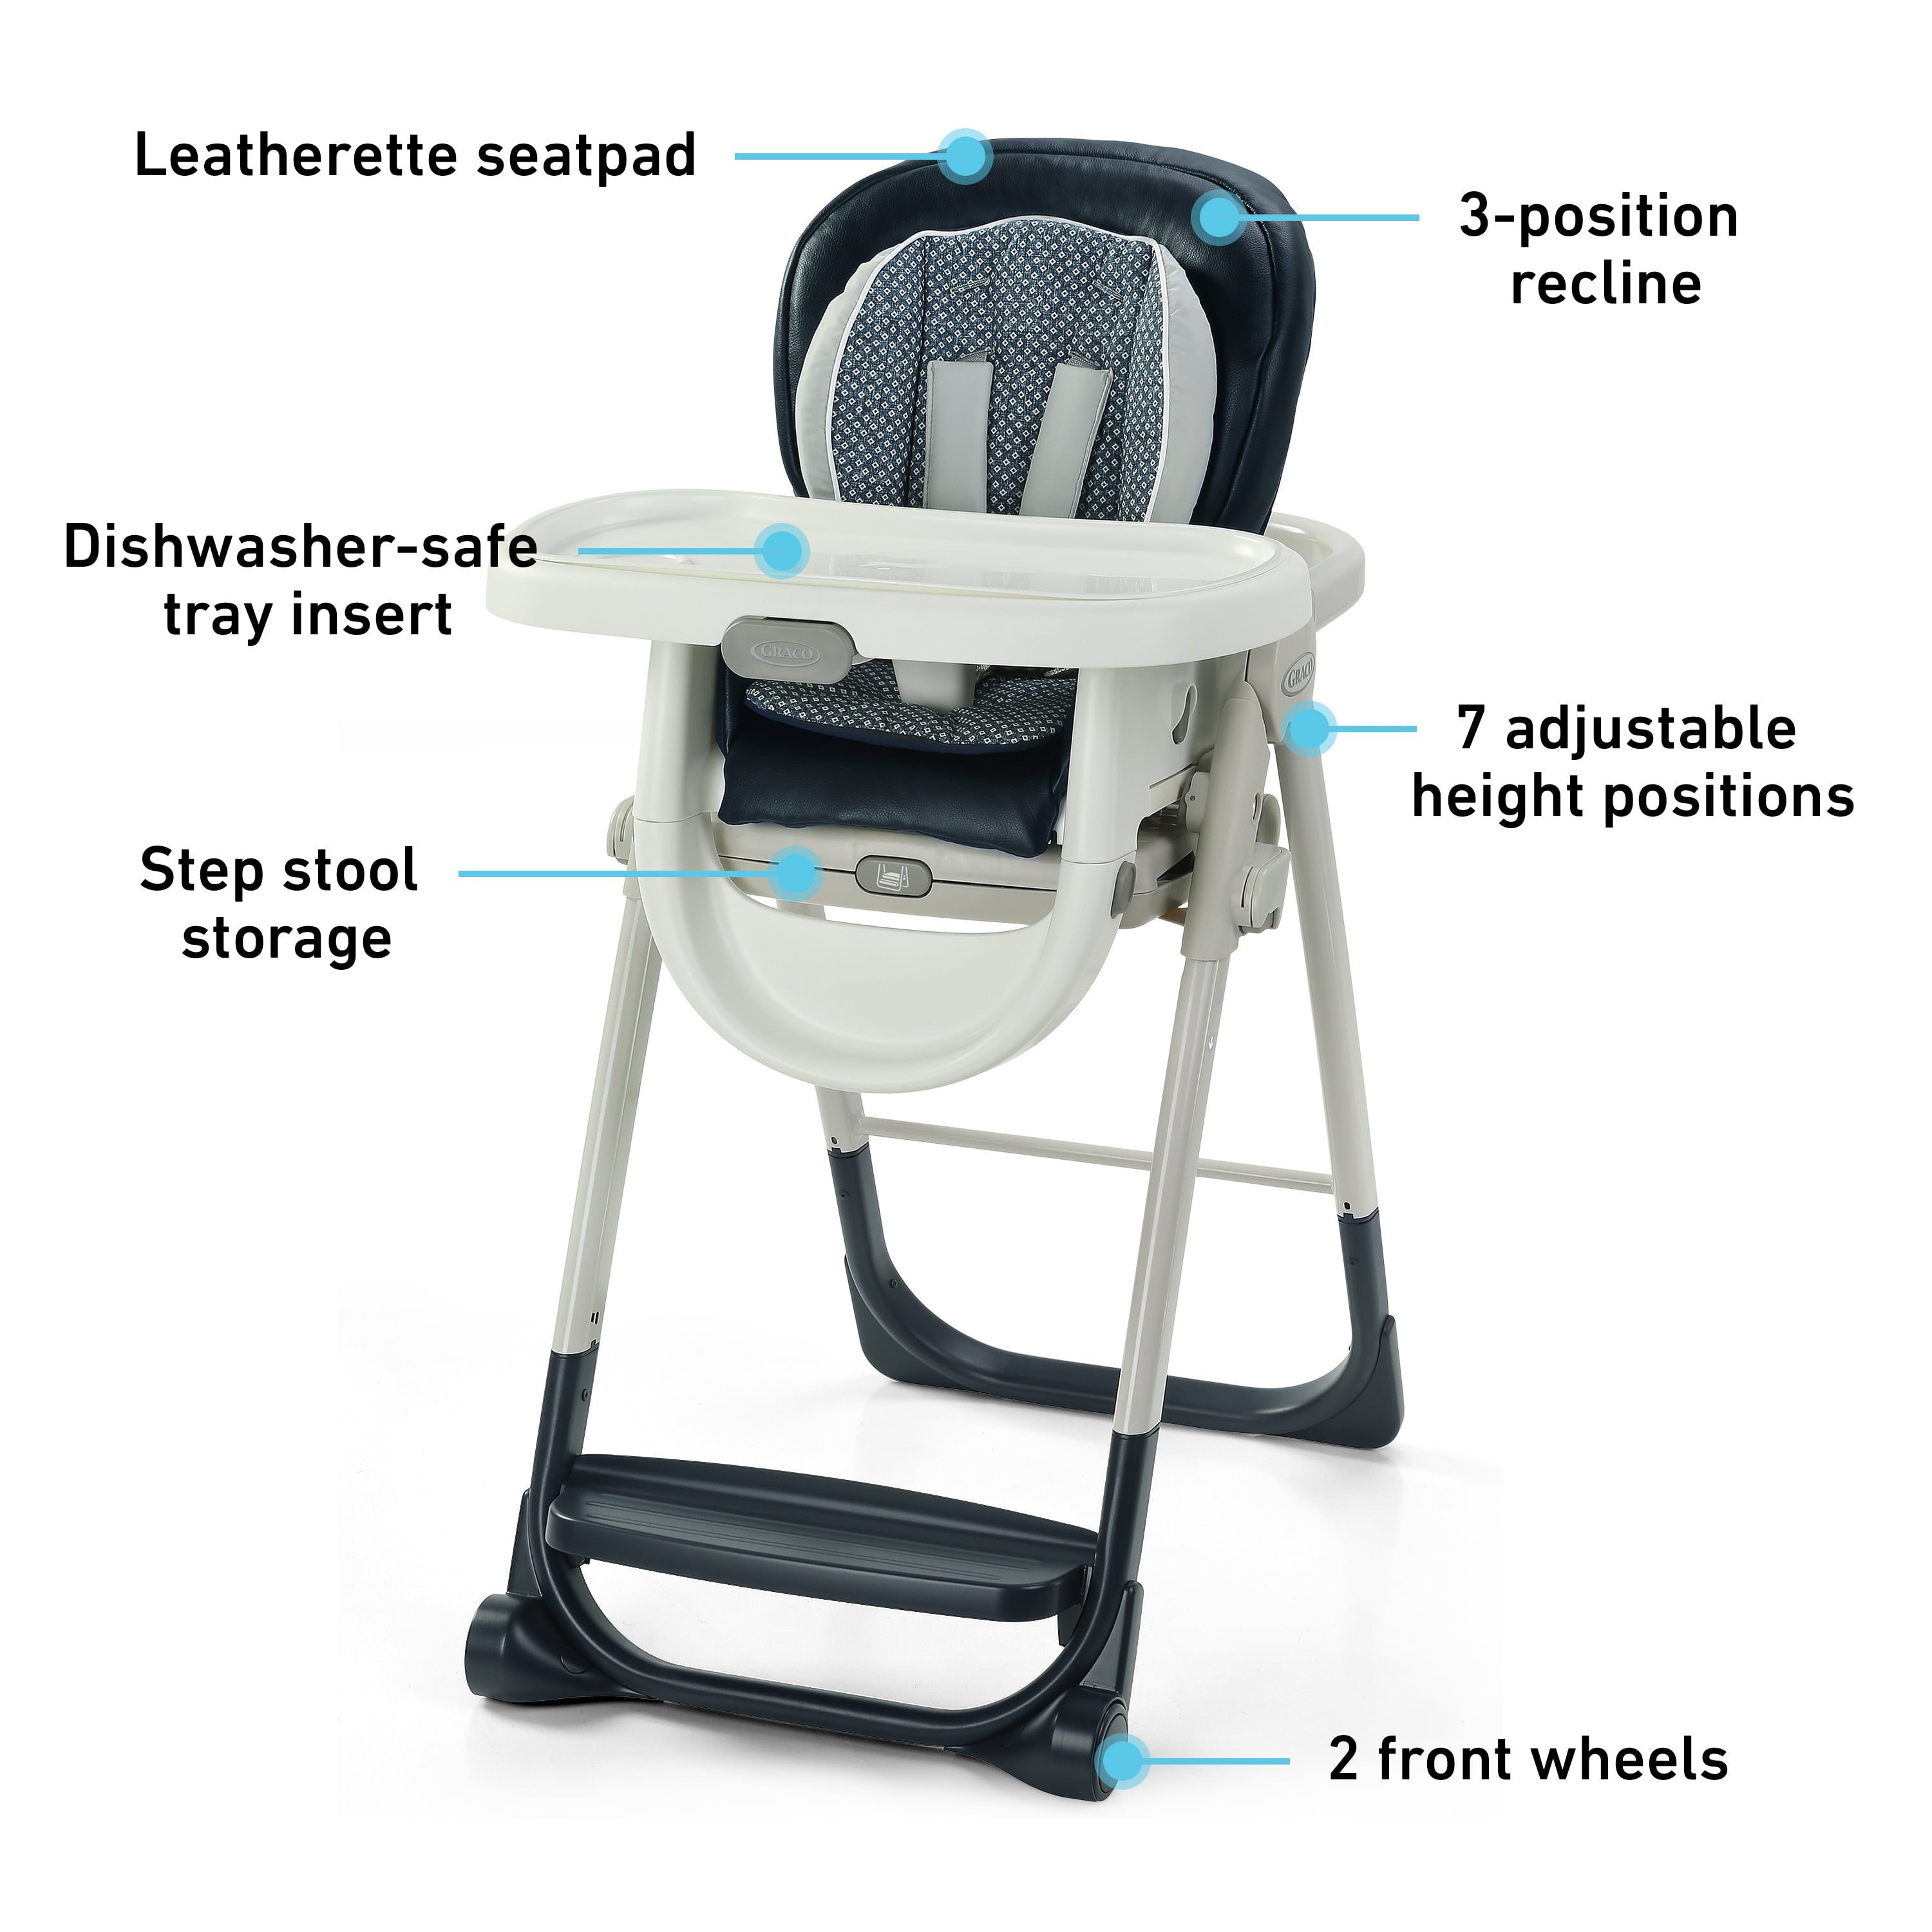 graco 7 in 1 high chair